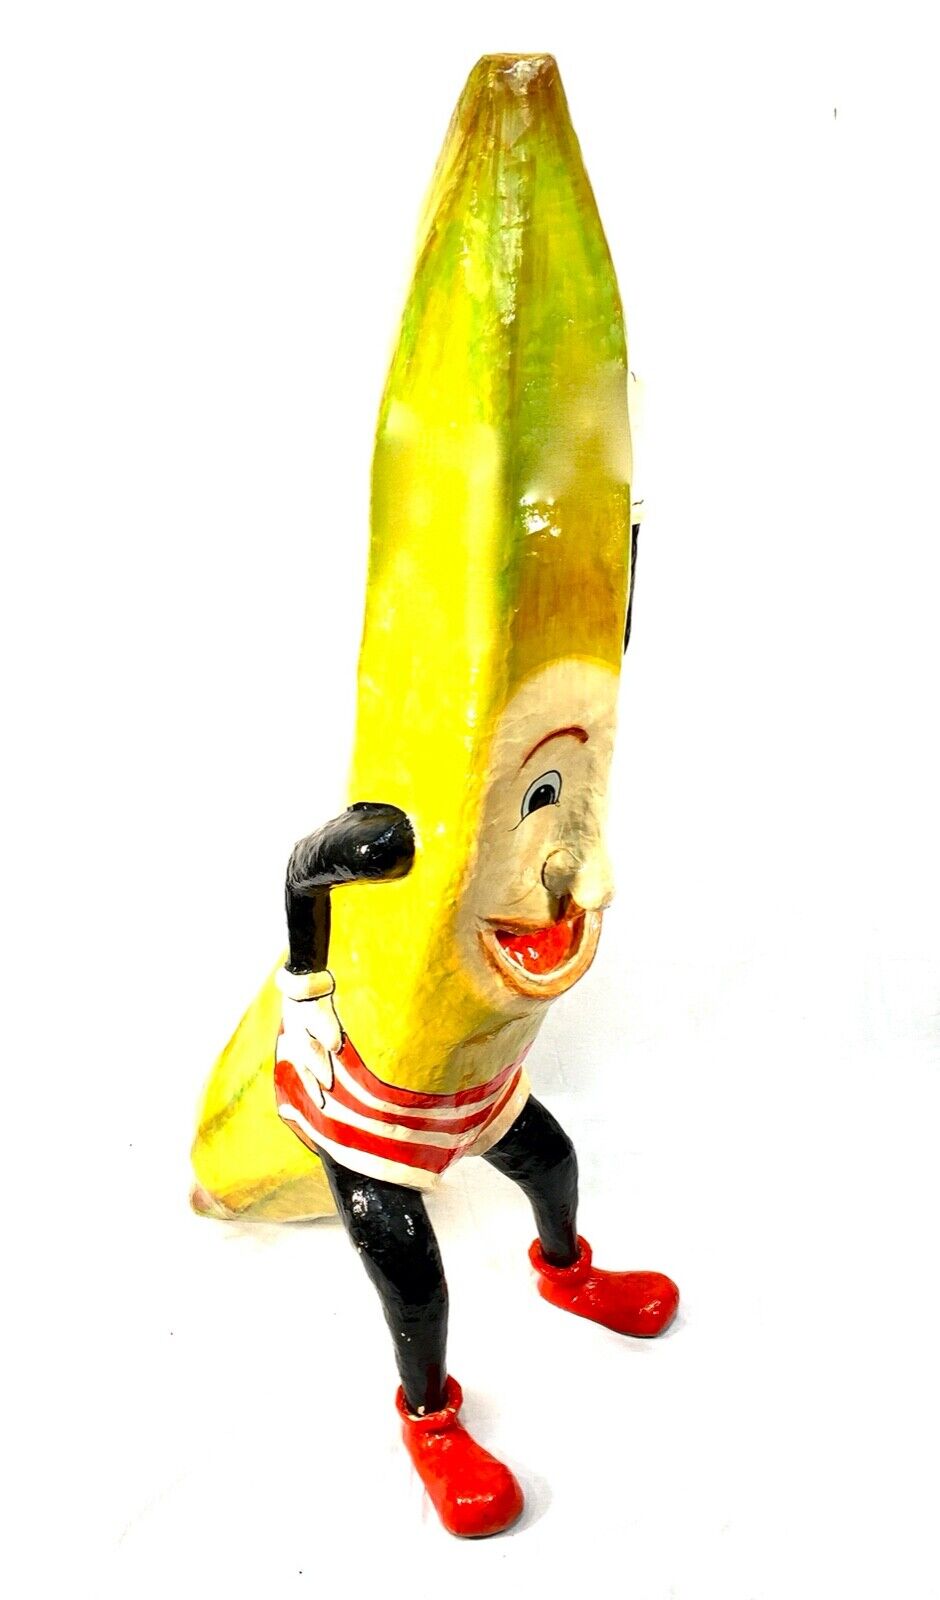 Antique Advertising - Large 1930's Fruit and Veg Shop Display Banana Statue Sign